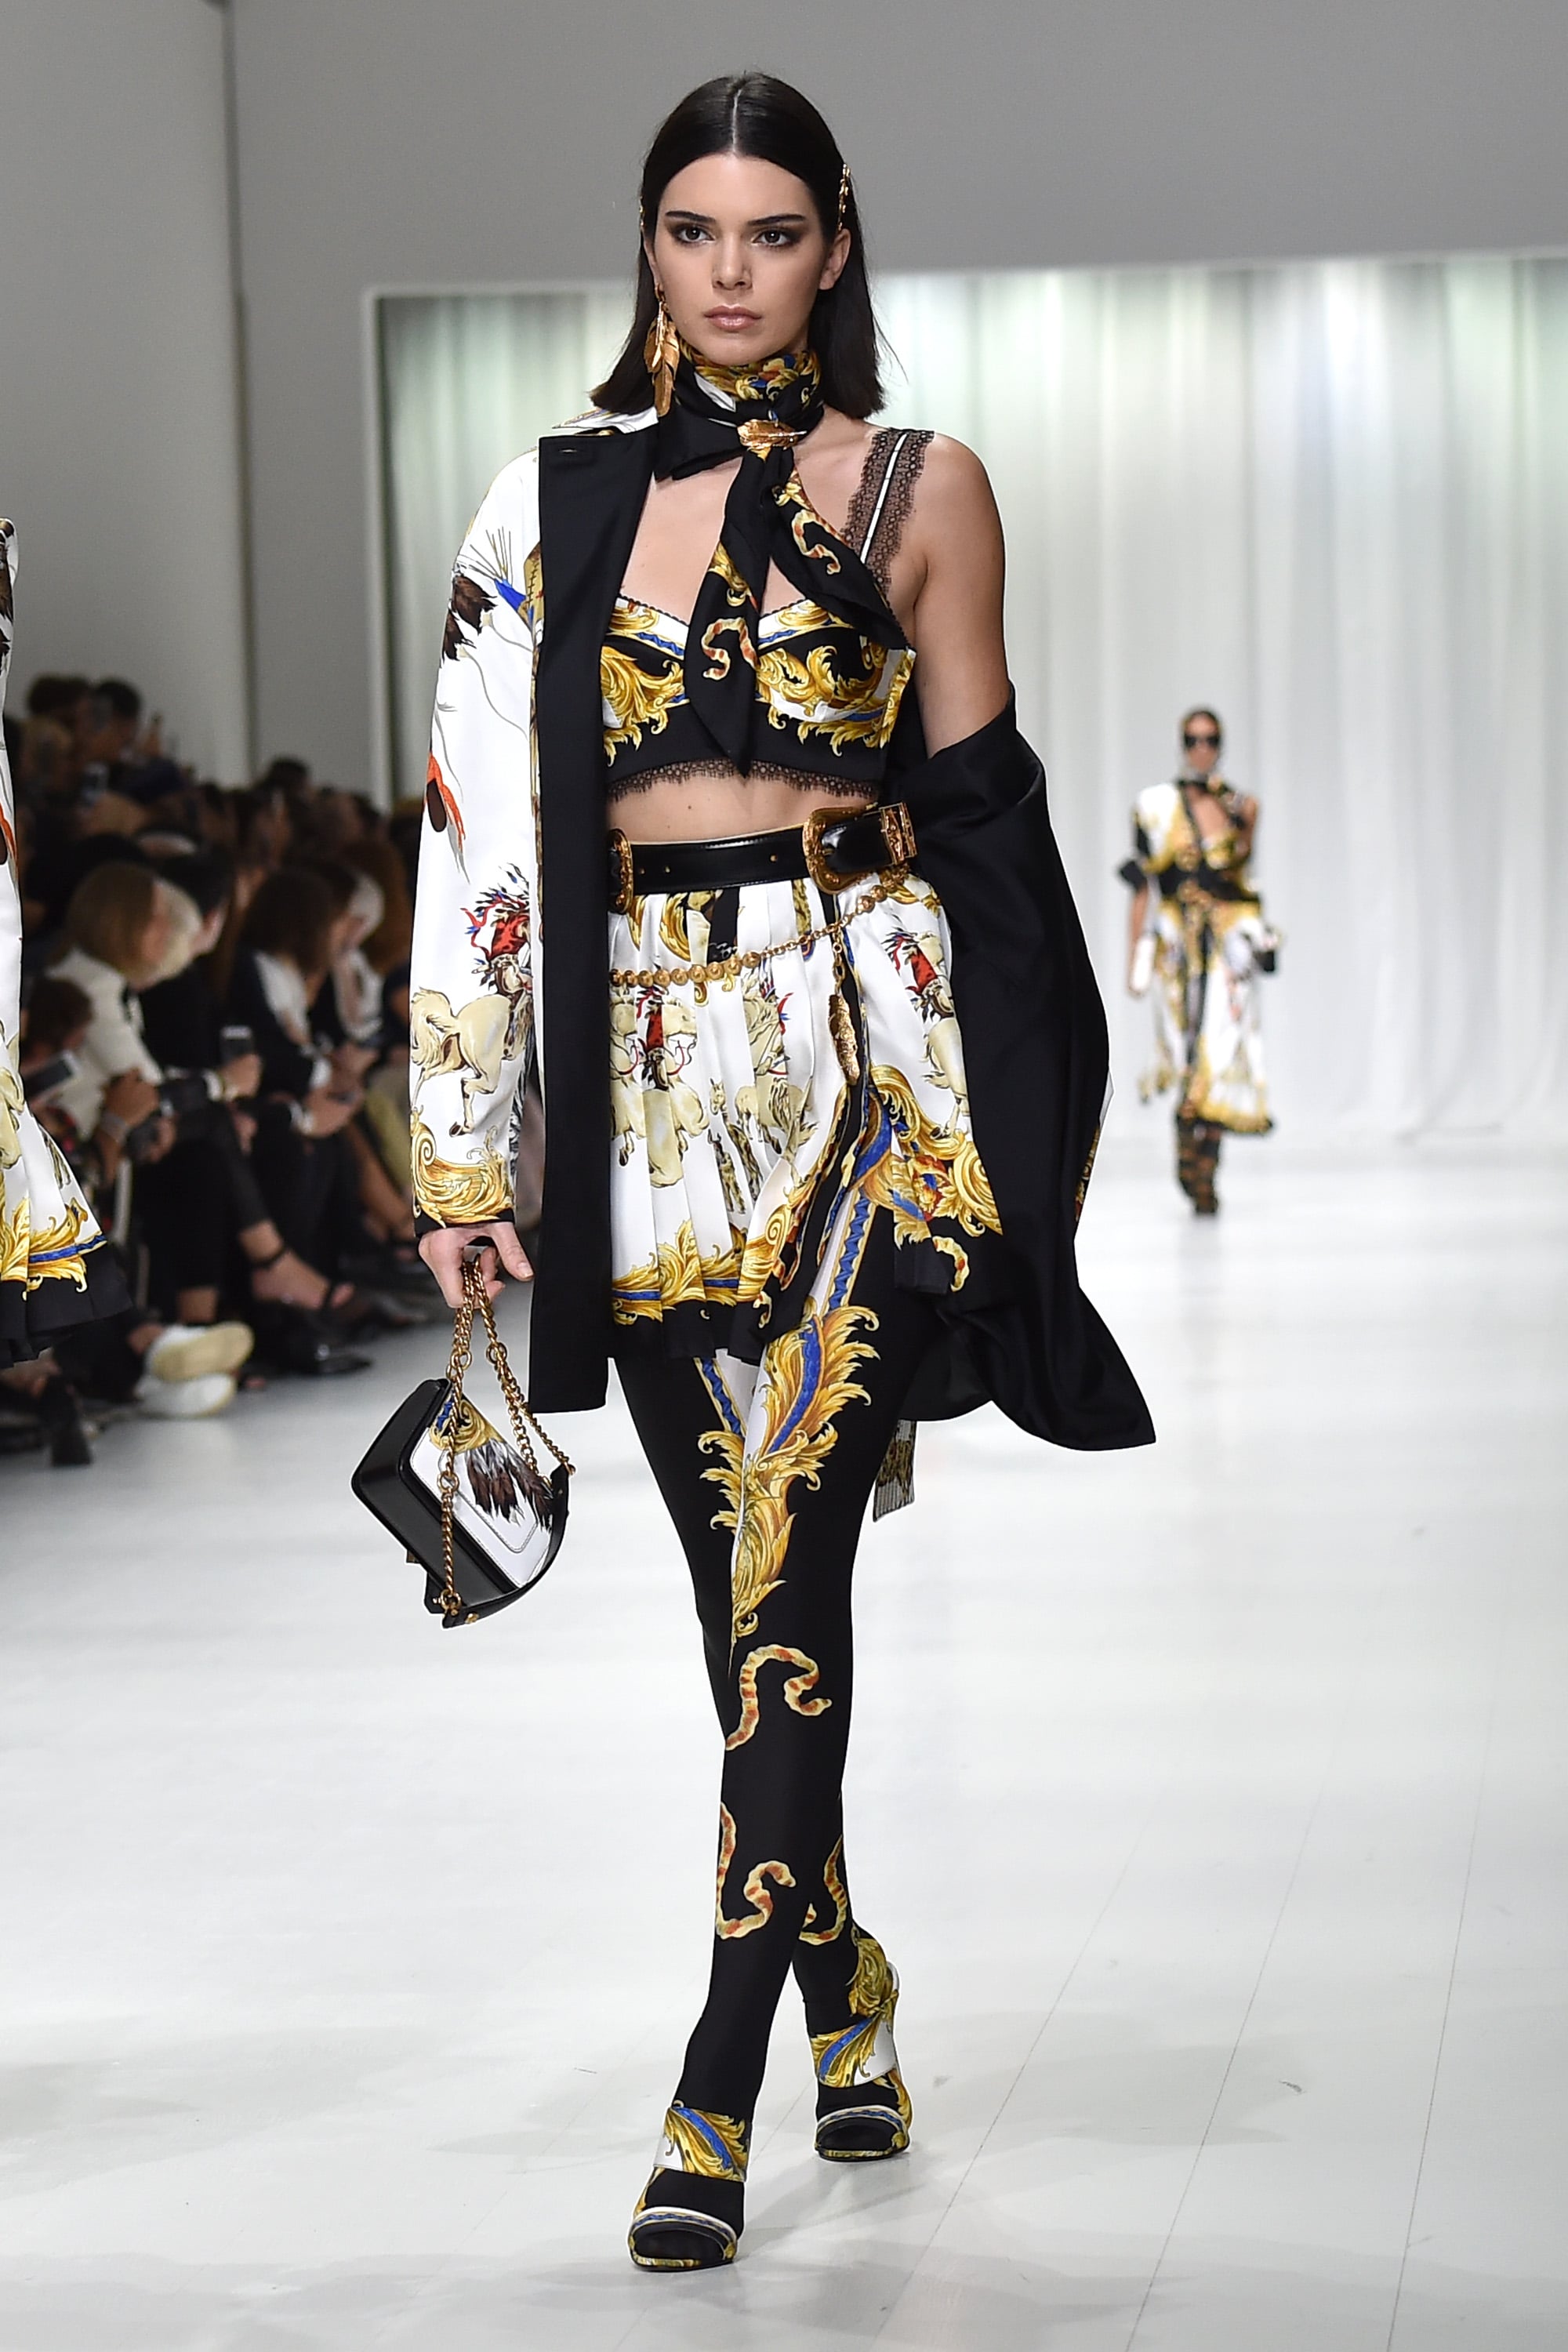 Kendall Jenner walks the runway at the Versace Ready to Wear fashion